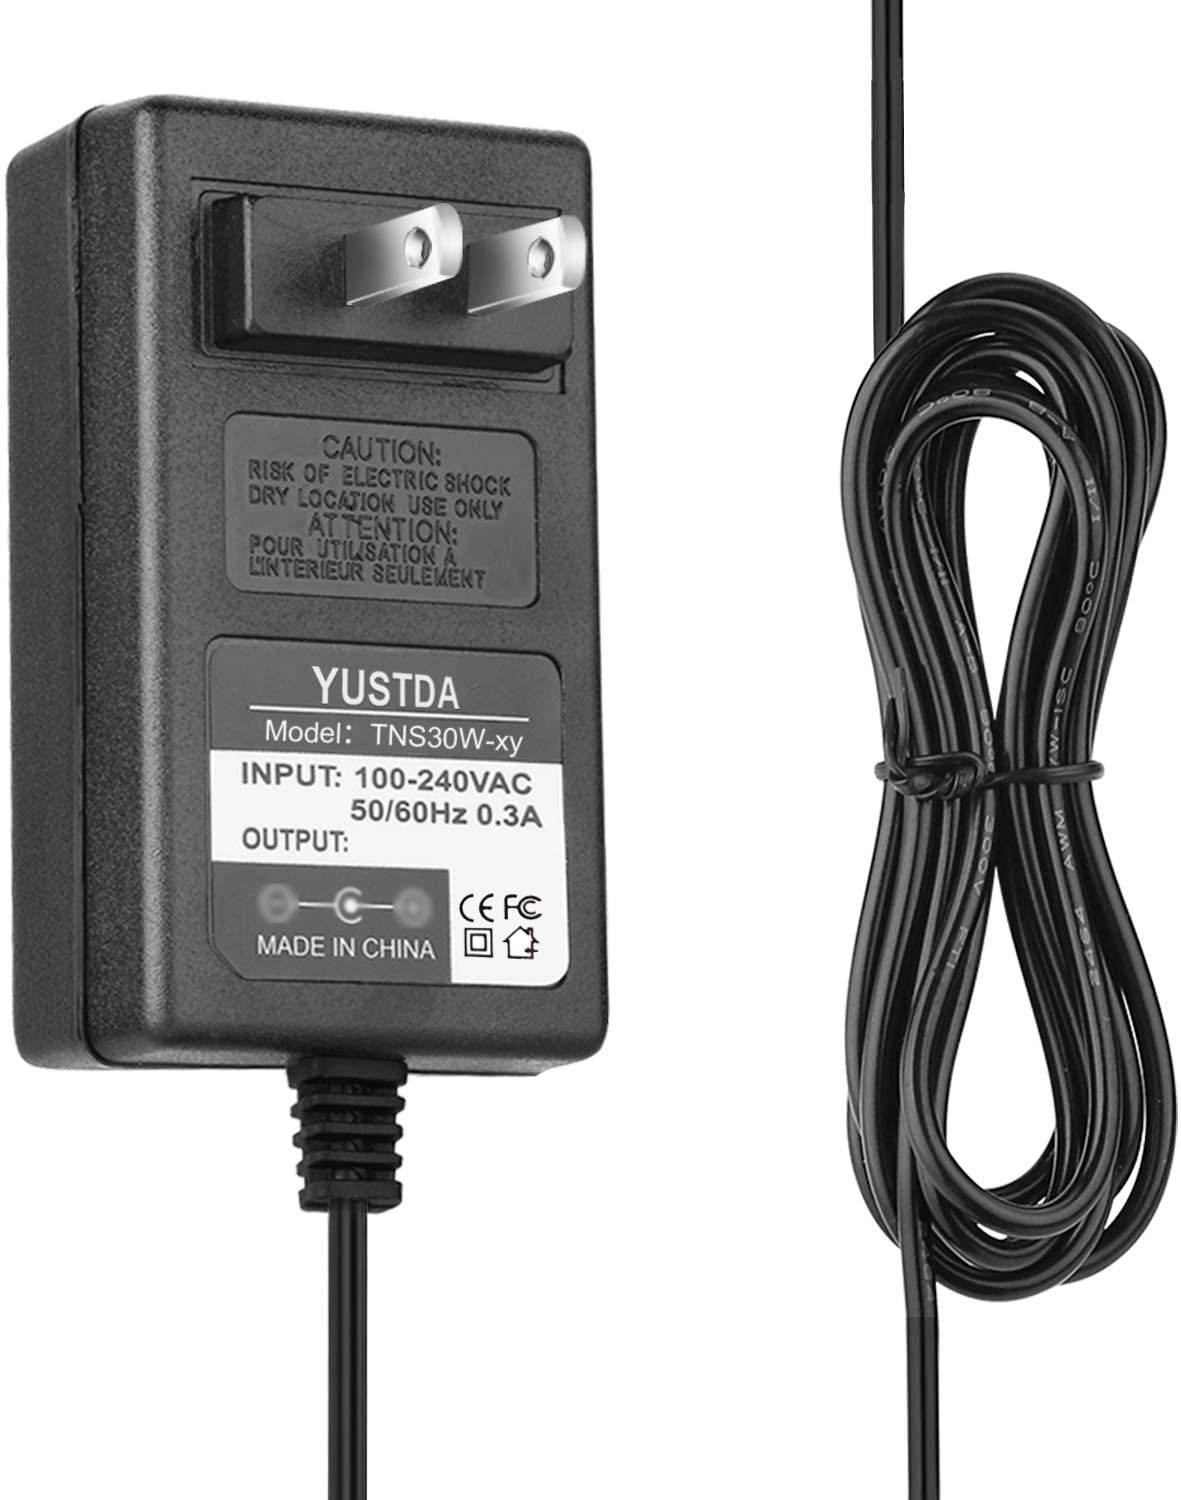 AT&T 3G Microcell Wireless DPH151-AT Signal Booster SUPPLY CORD AC DC Car Charge 